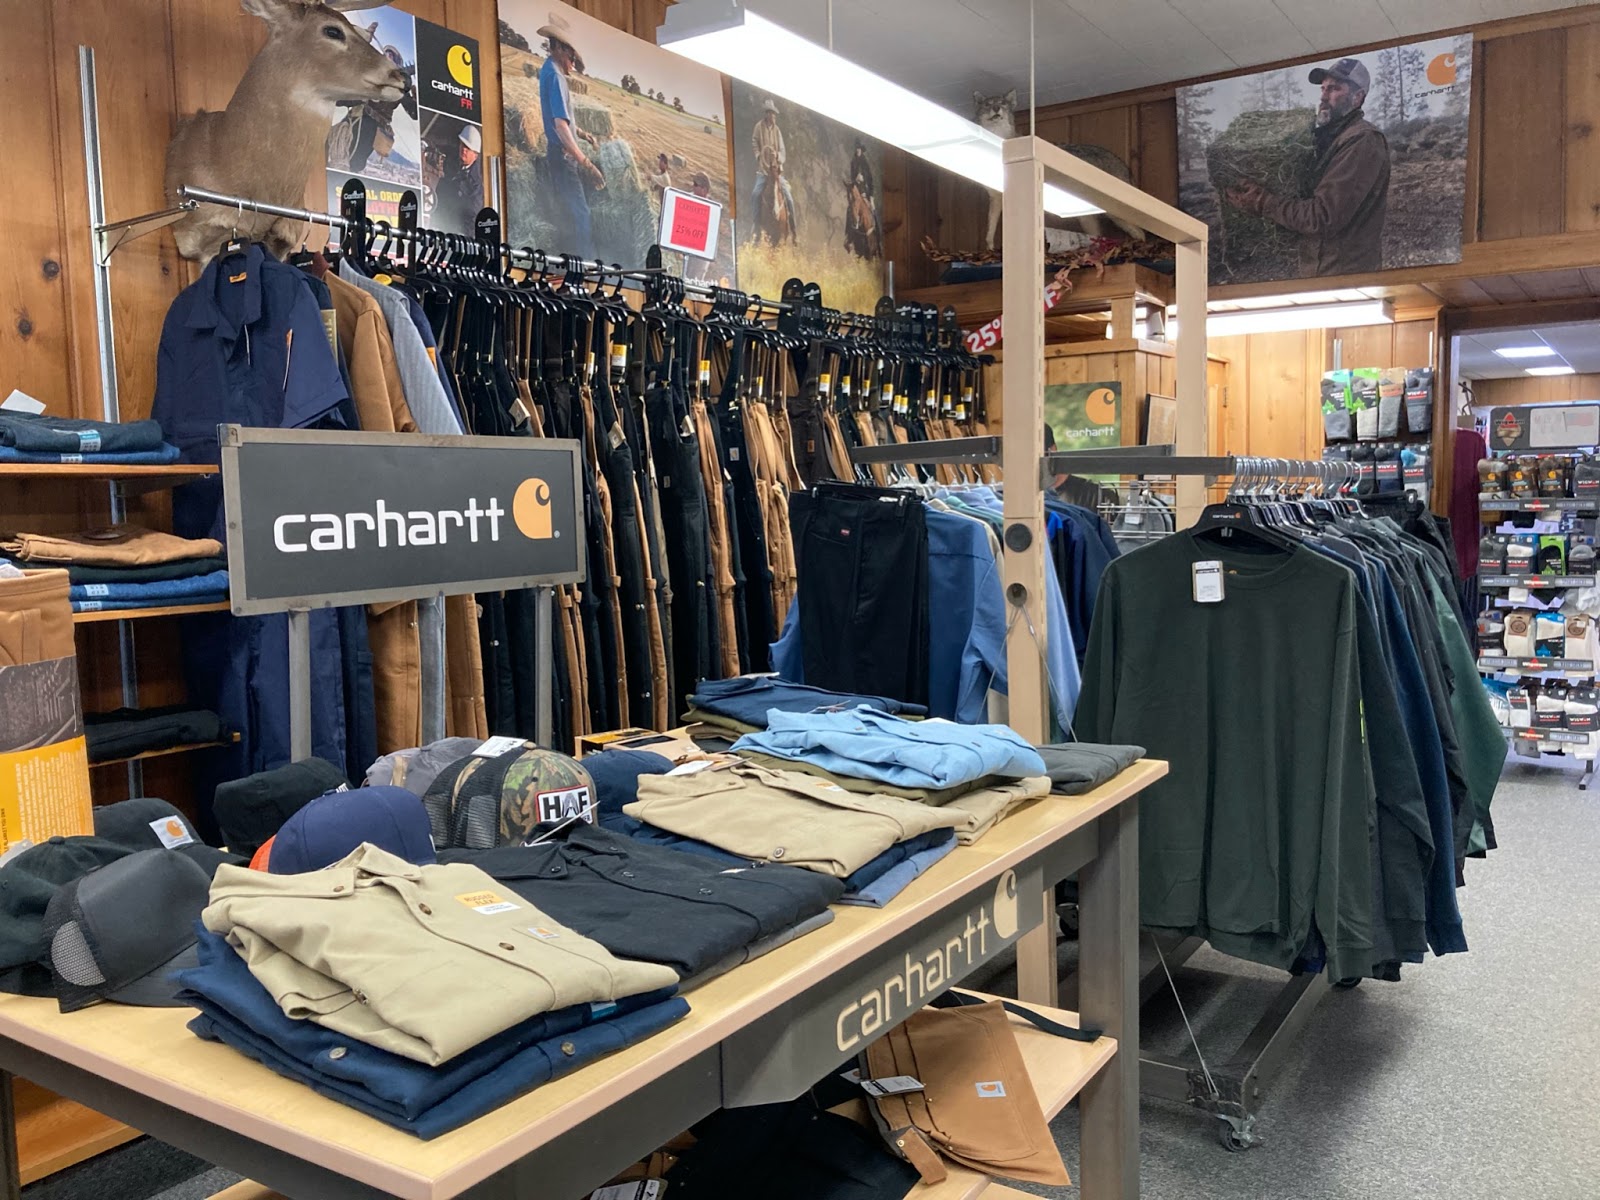 Jonesville clothing store was first to sell Carhartt brand in nation